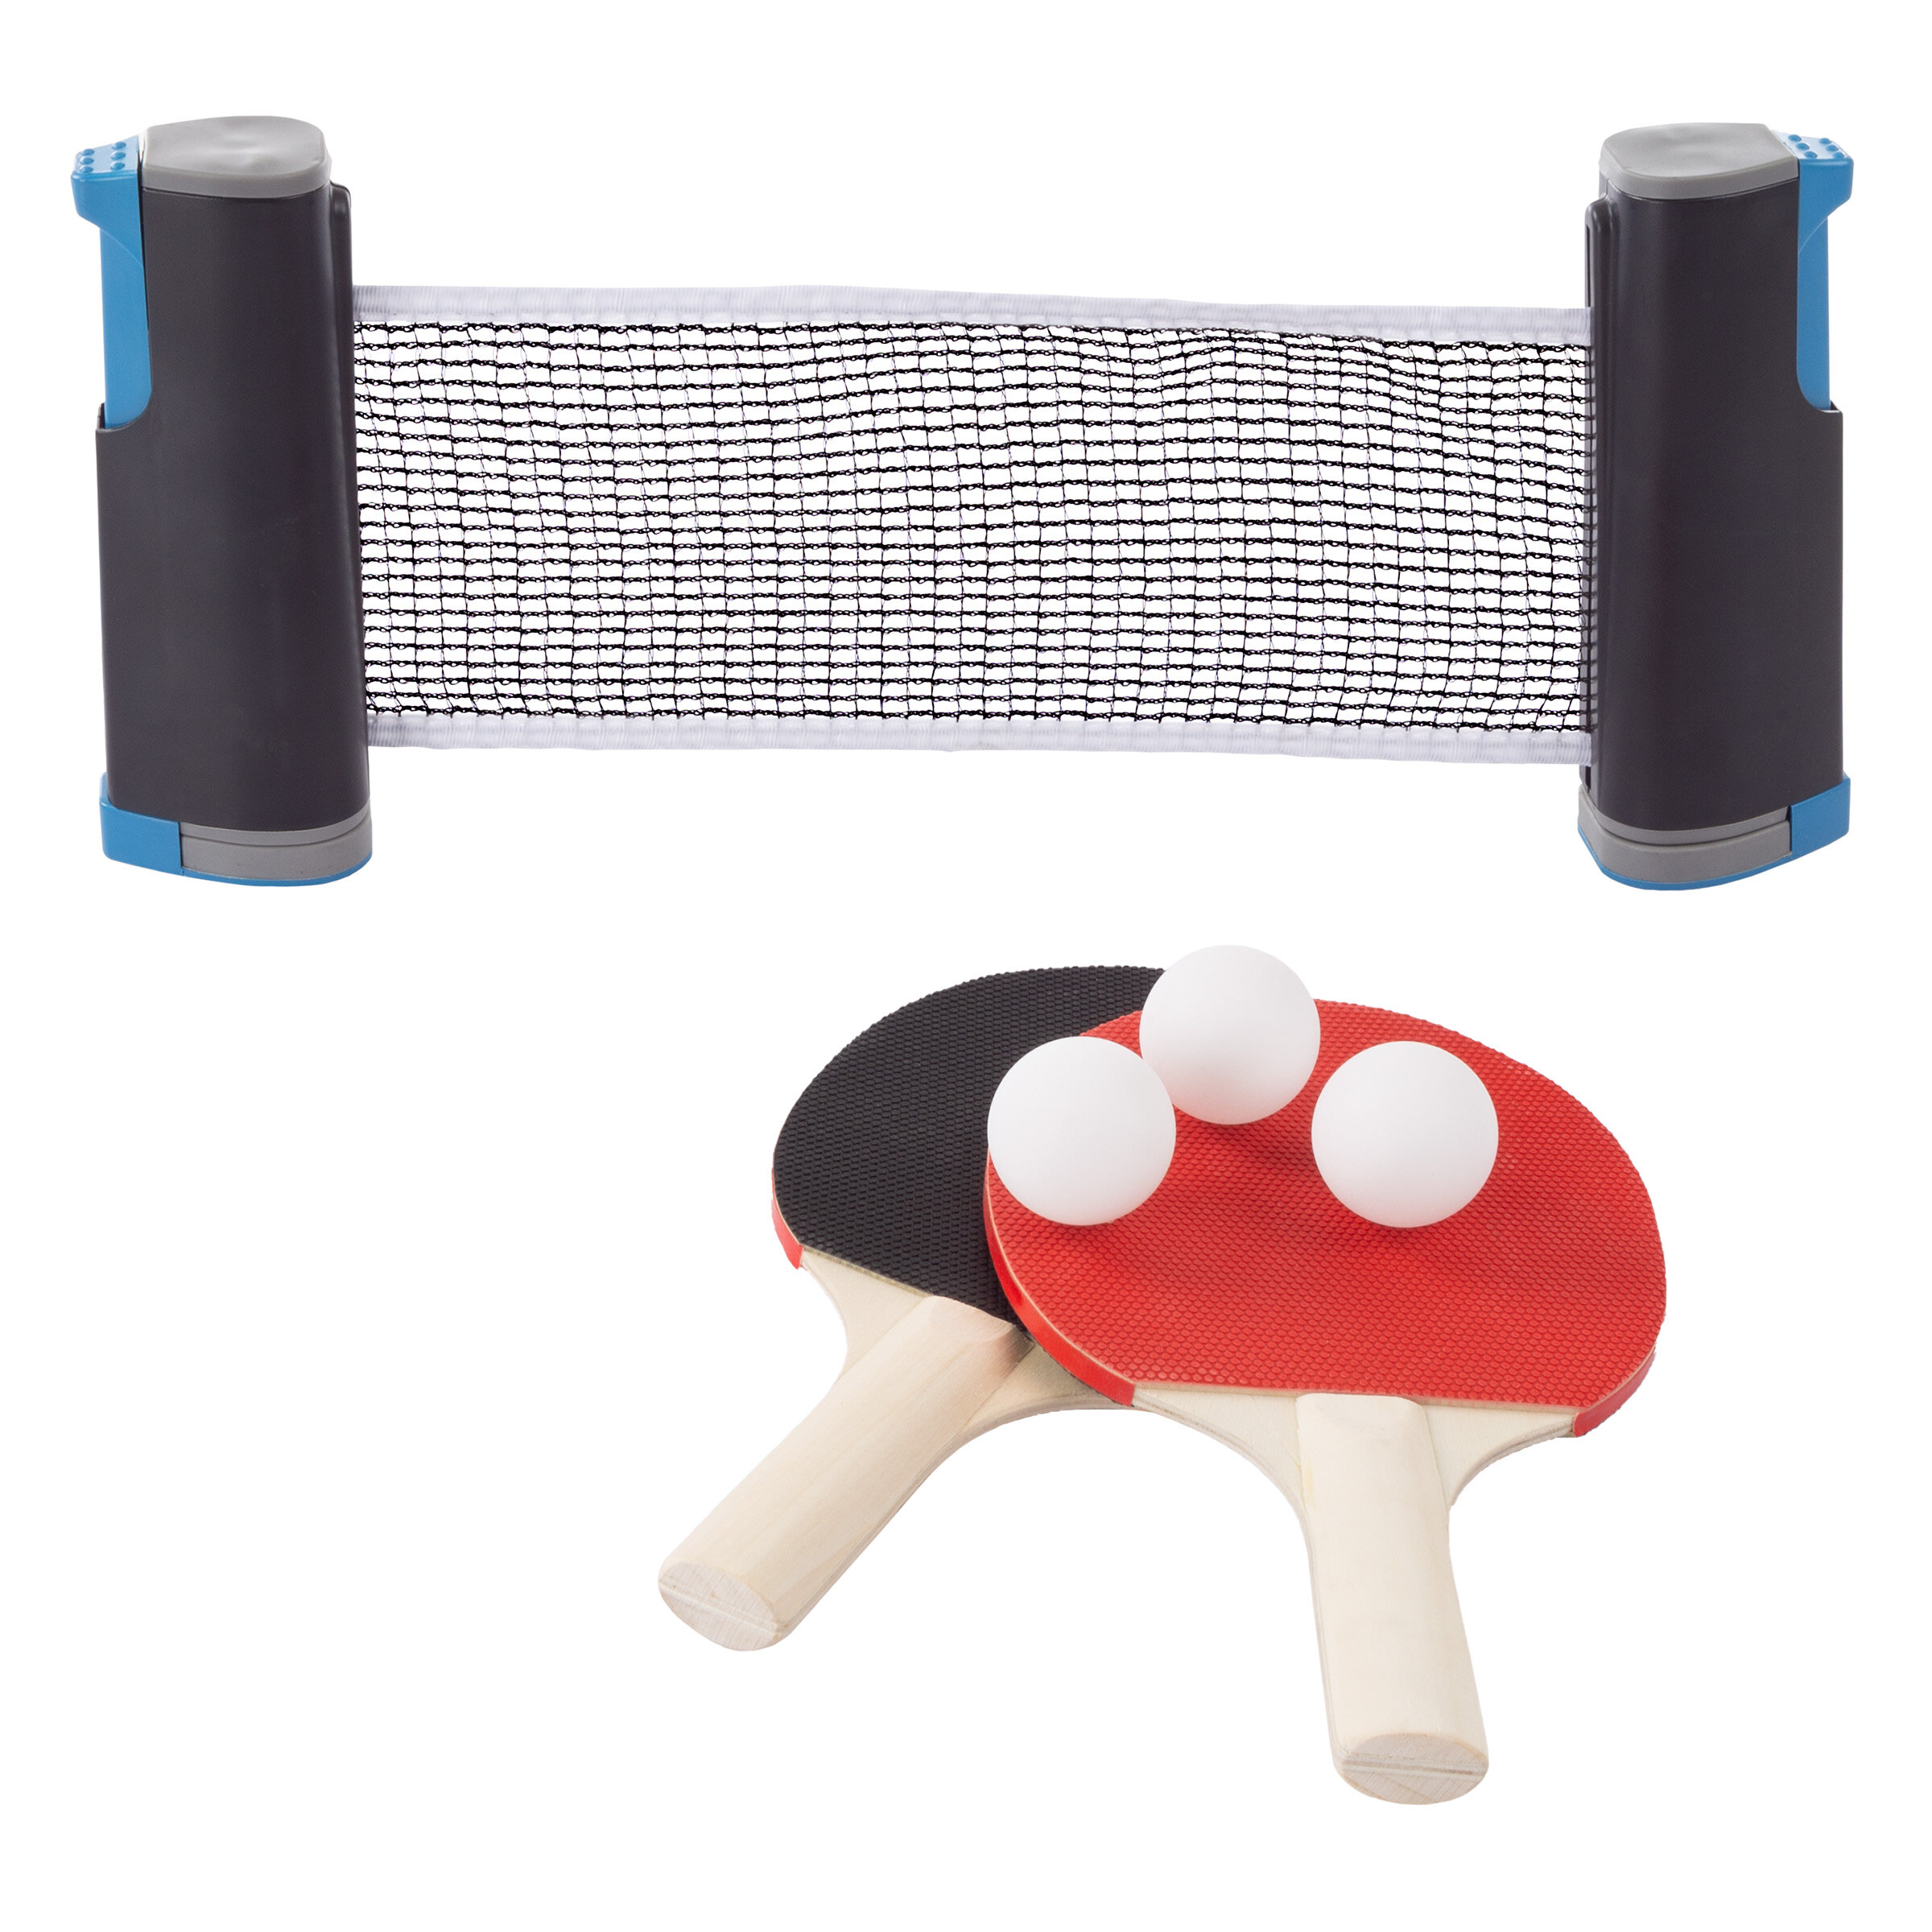 Ideal for Recreational Games Portable Table Tennis Set Pack of 2 Rackets,6 Table Tennis Balls and Adjustable Net XDDIAS Ping Pong Paddles Set 